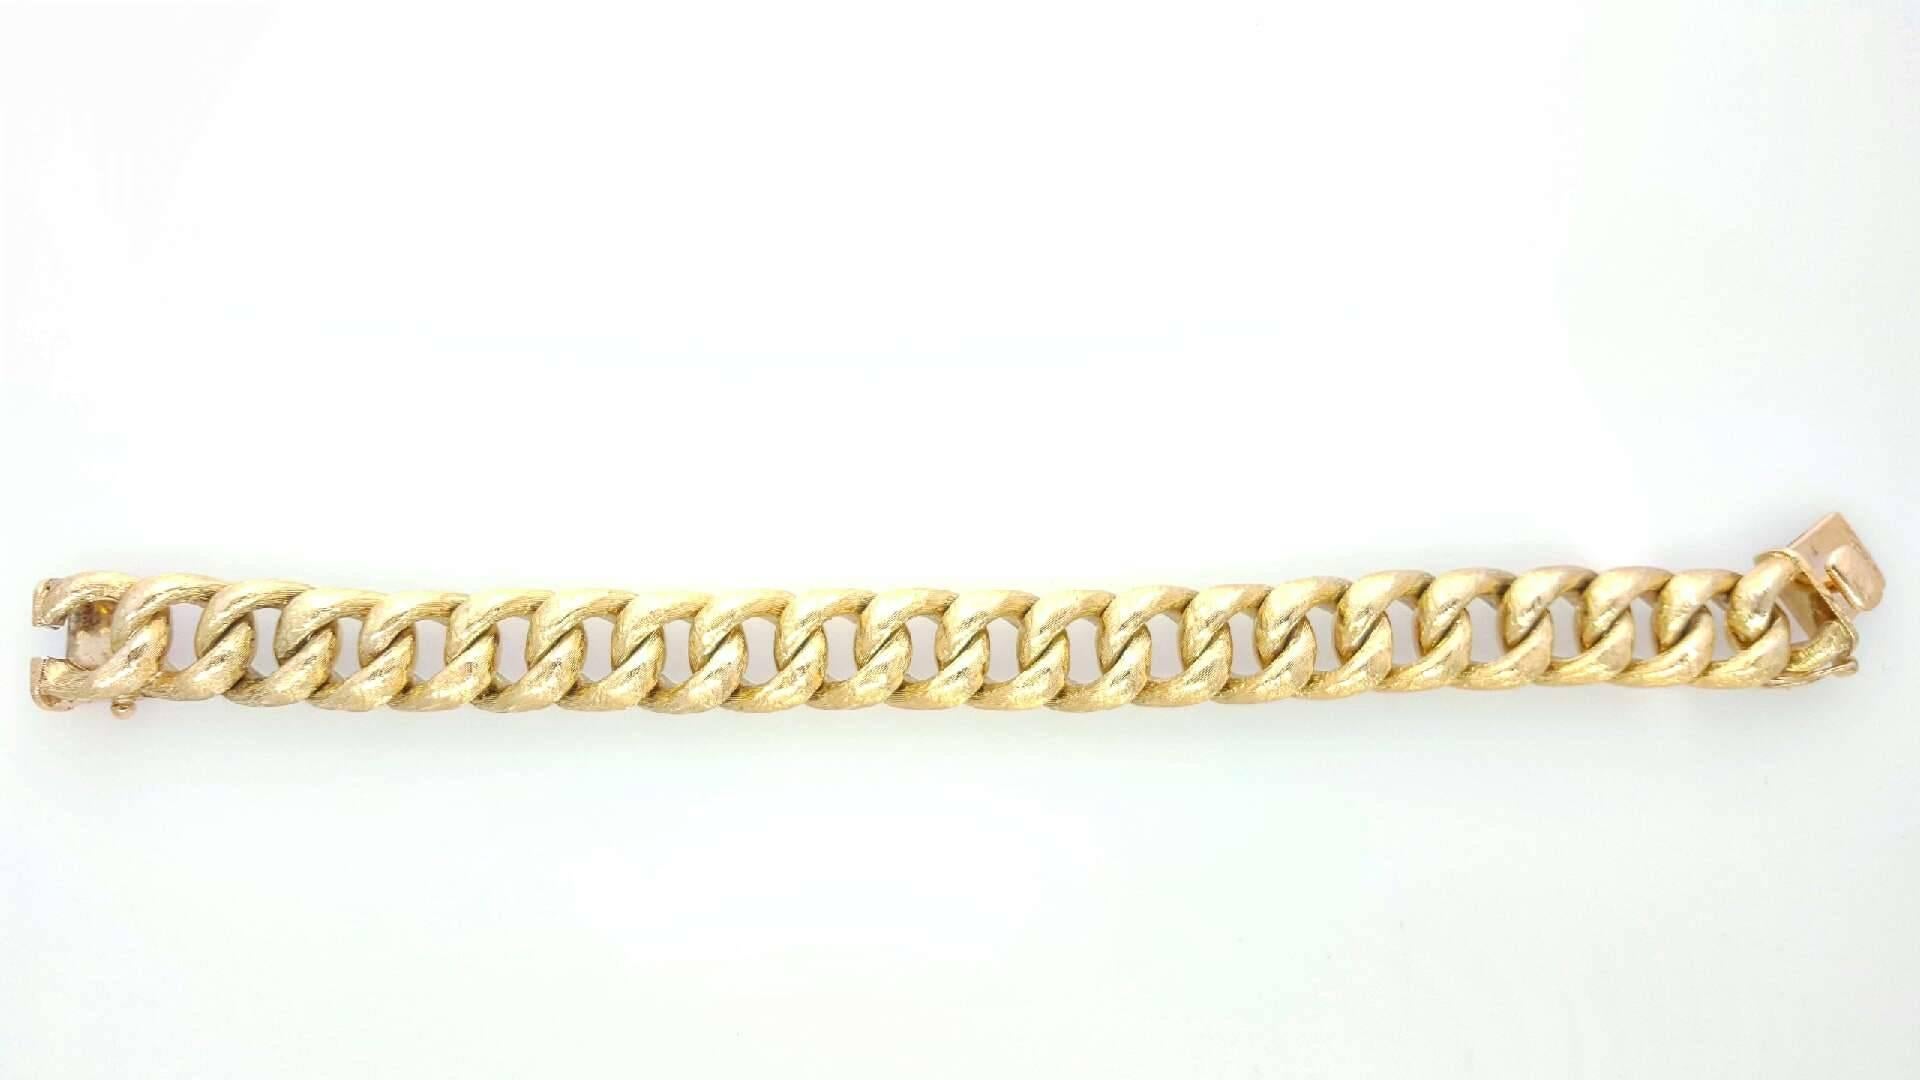 14 Karat Yellow Gold solid Curb Link Bracelet with Push Button release. The top of the bracelet is textured. The bracelet measures 7.5 inches long and weighs 66.5 grams. 